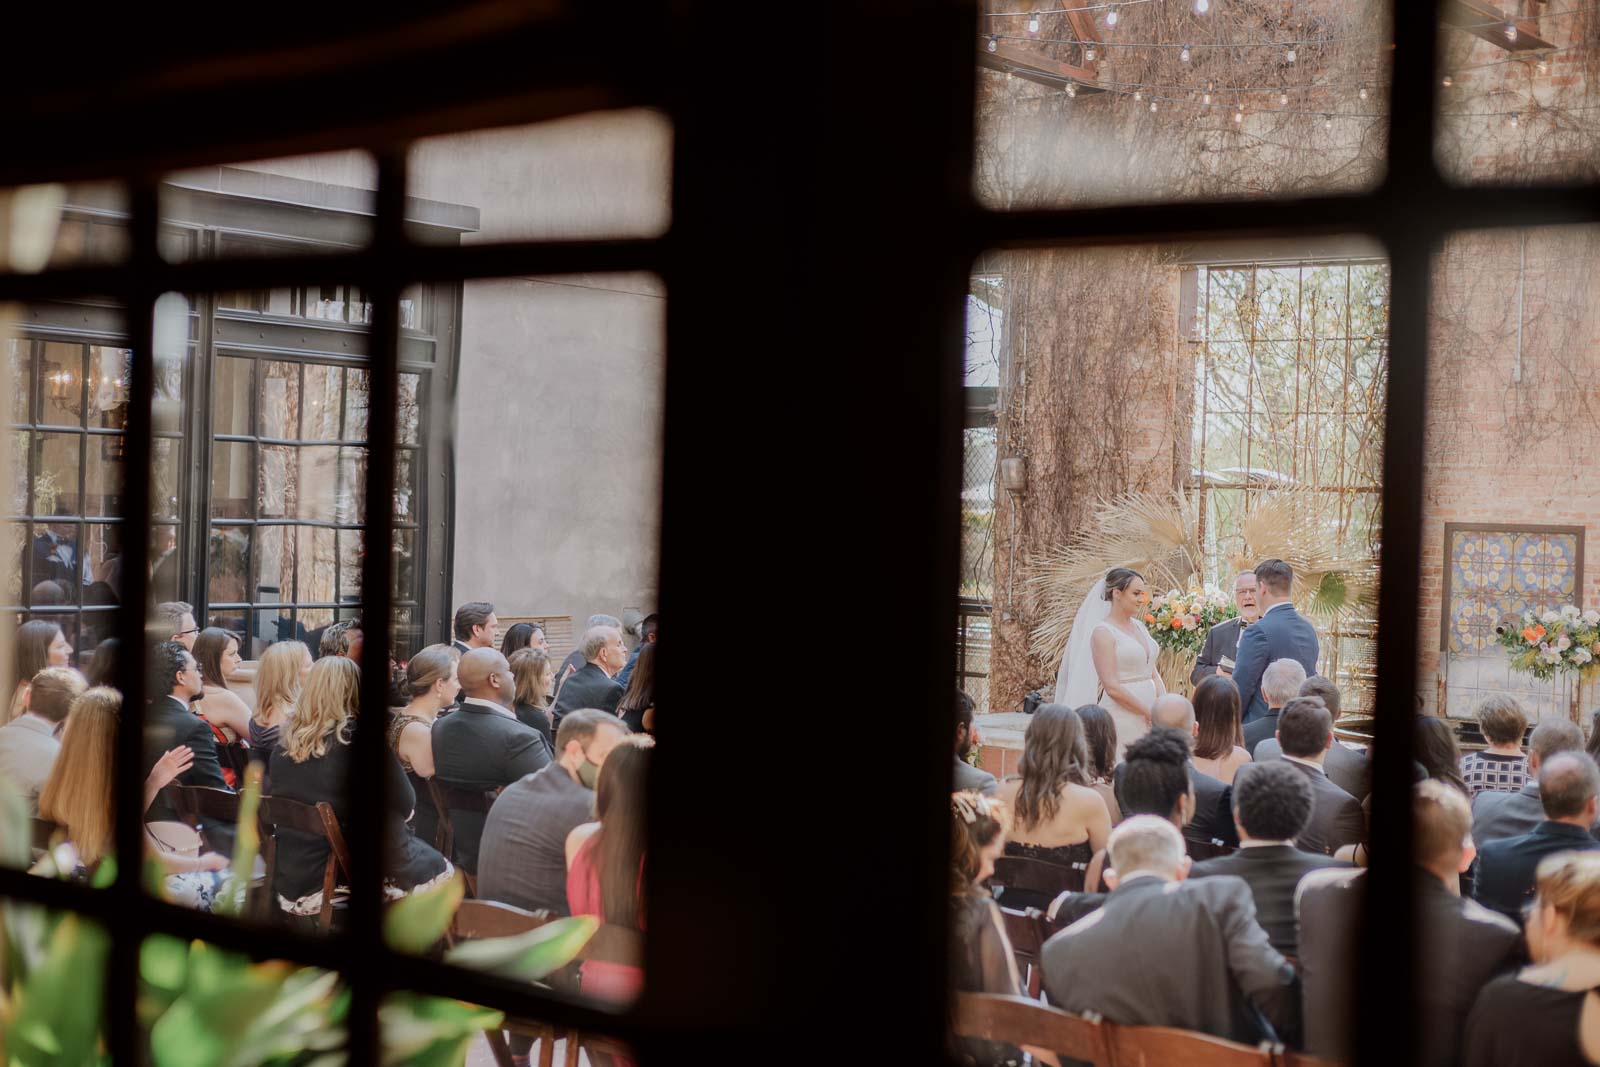 The wedding ceremony for a craft through a window at the courtyards at Emma